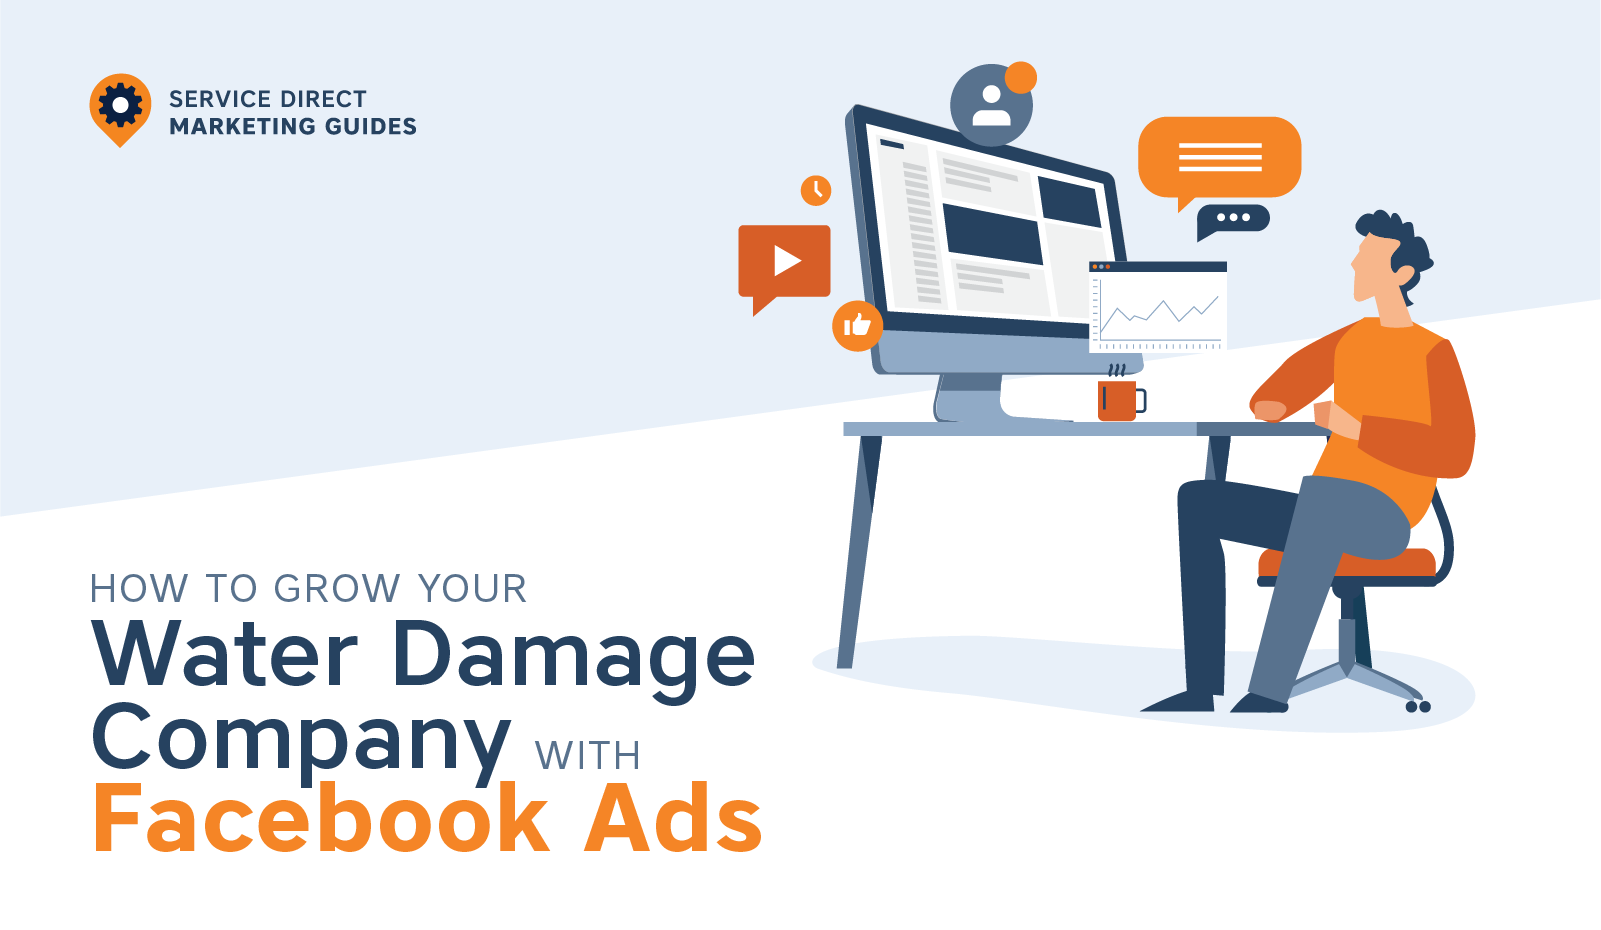 How to Grow Your Water Damage Company with Facebook Ads